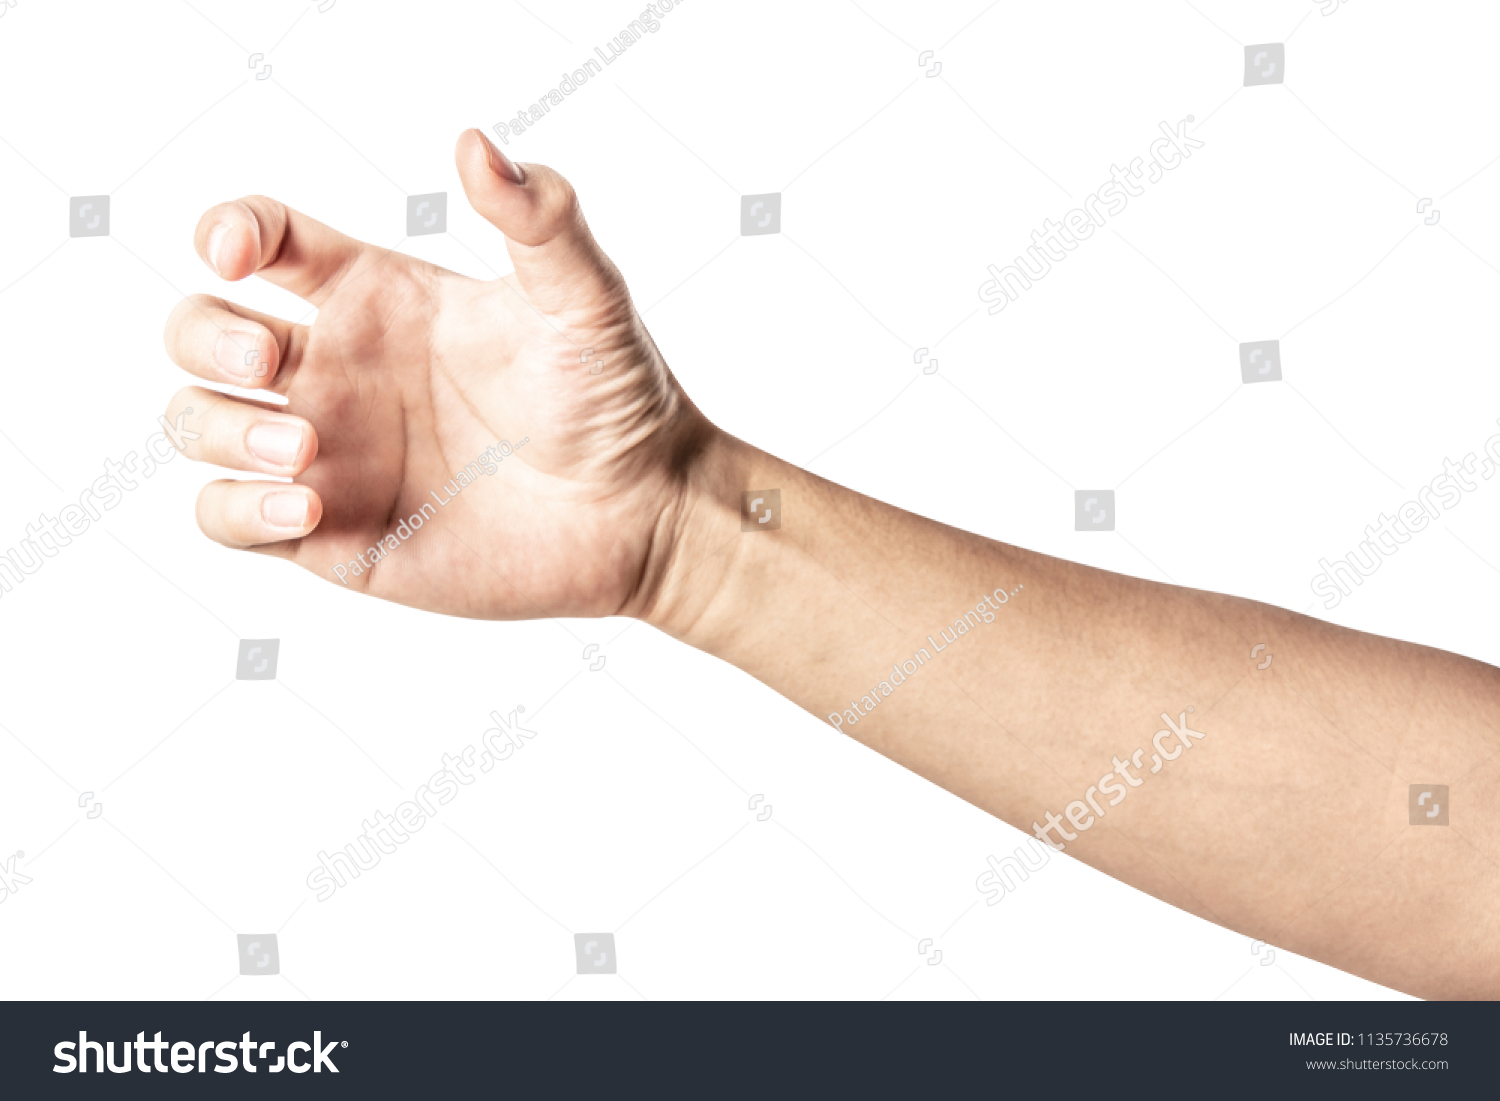 Close up hand holding something like a bottle or can isolated on white background with clipping path. #1135736678